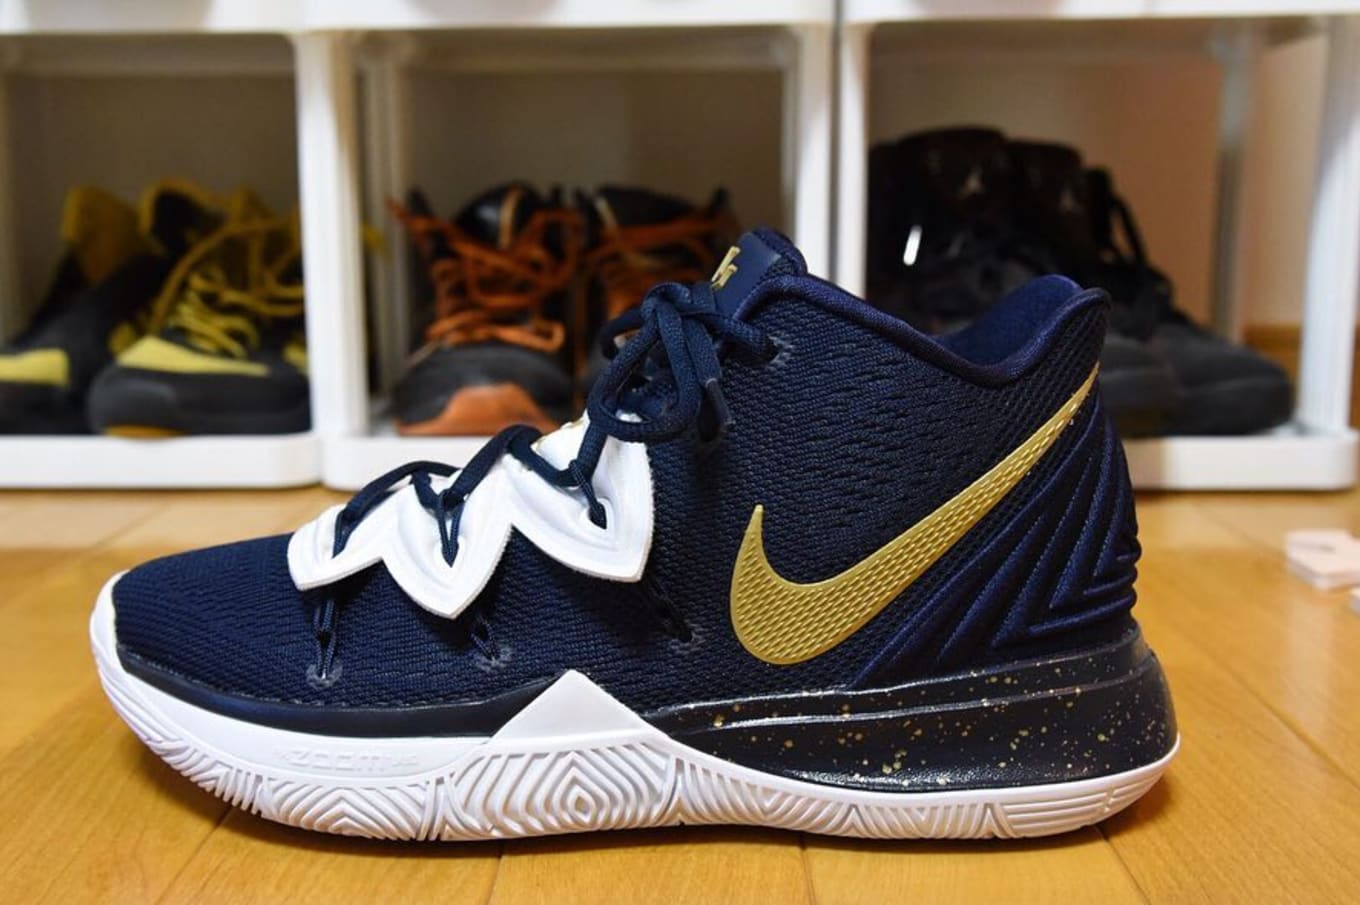 NIKEiD By You Kyrie 5 Designs | Sole 